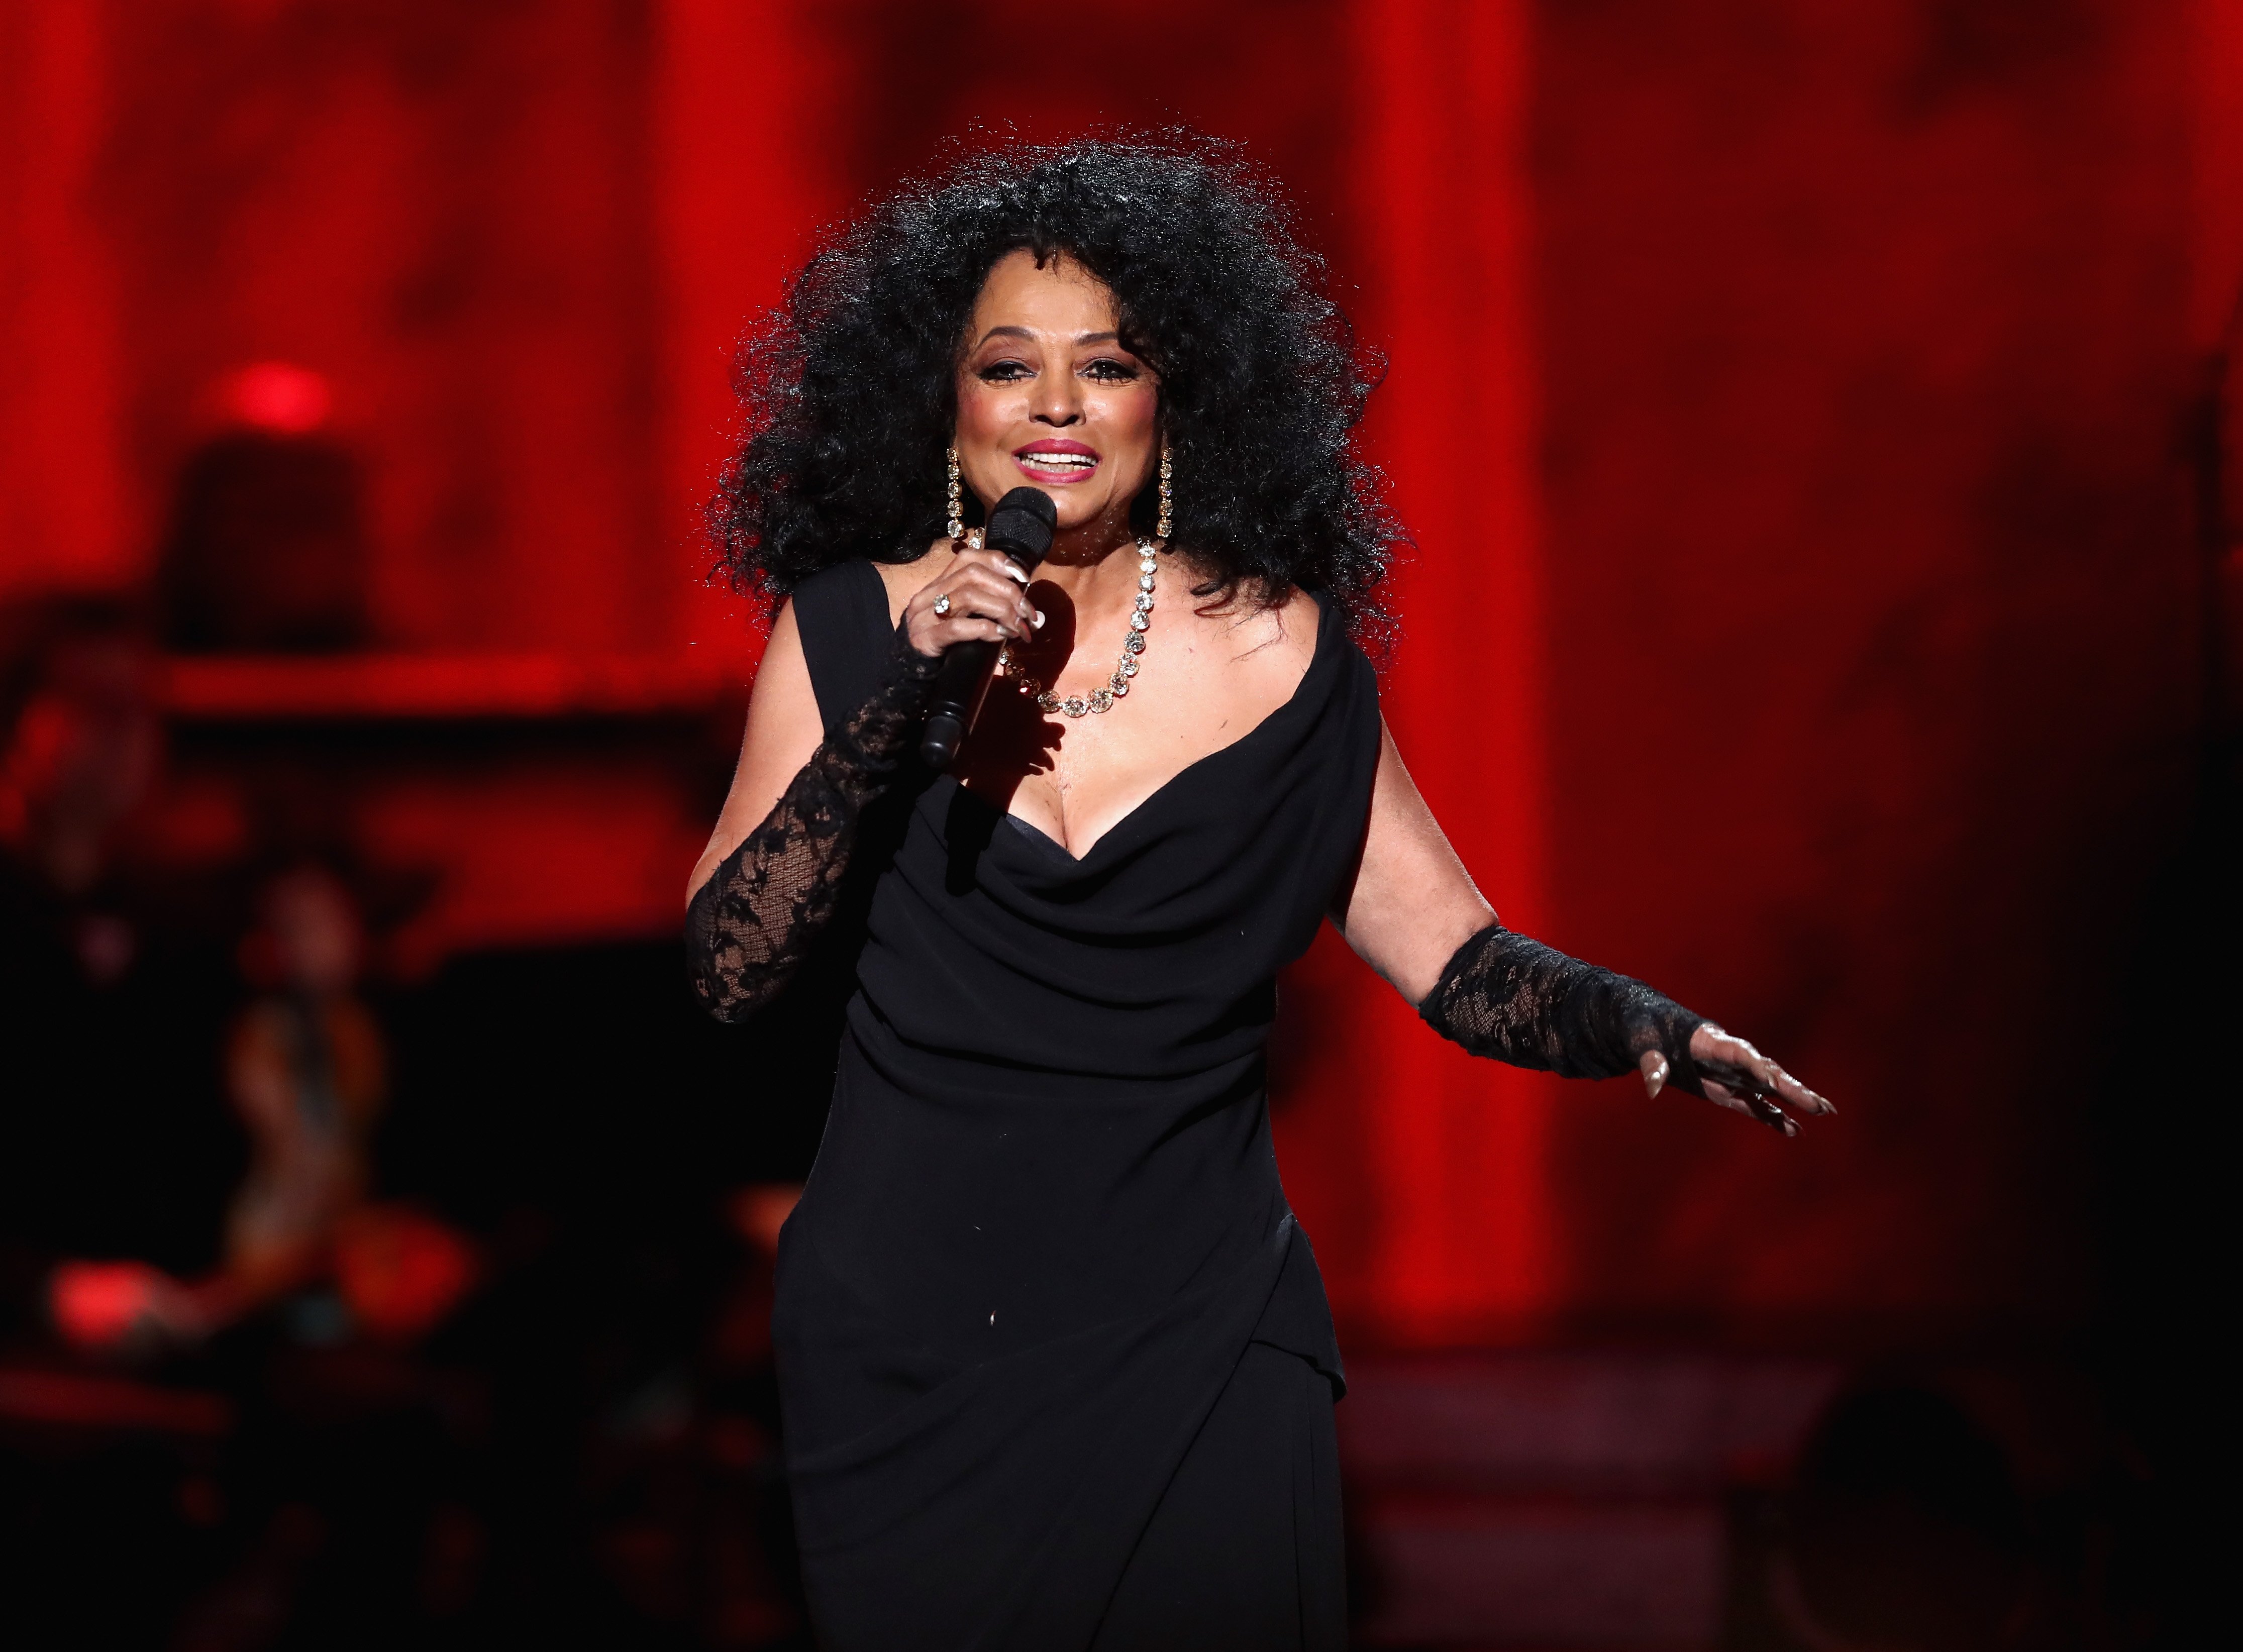 Diana Ross onstage at the "Motown 60: A Grammy Celebration" on February 12, 2019. | Photo: Getty Images.